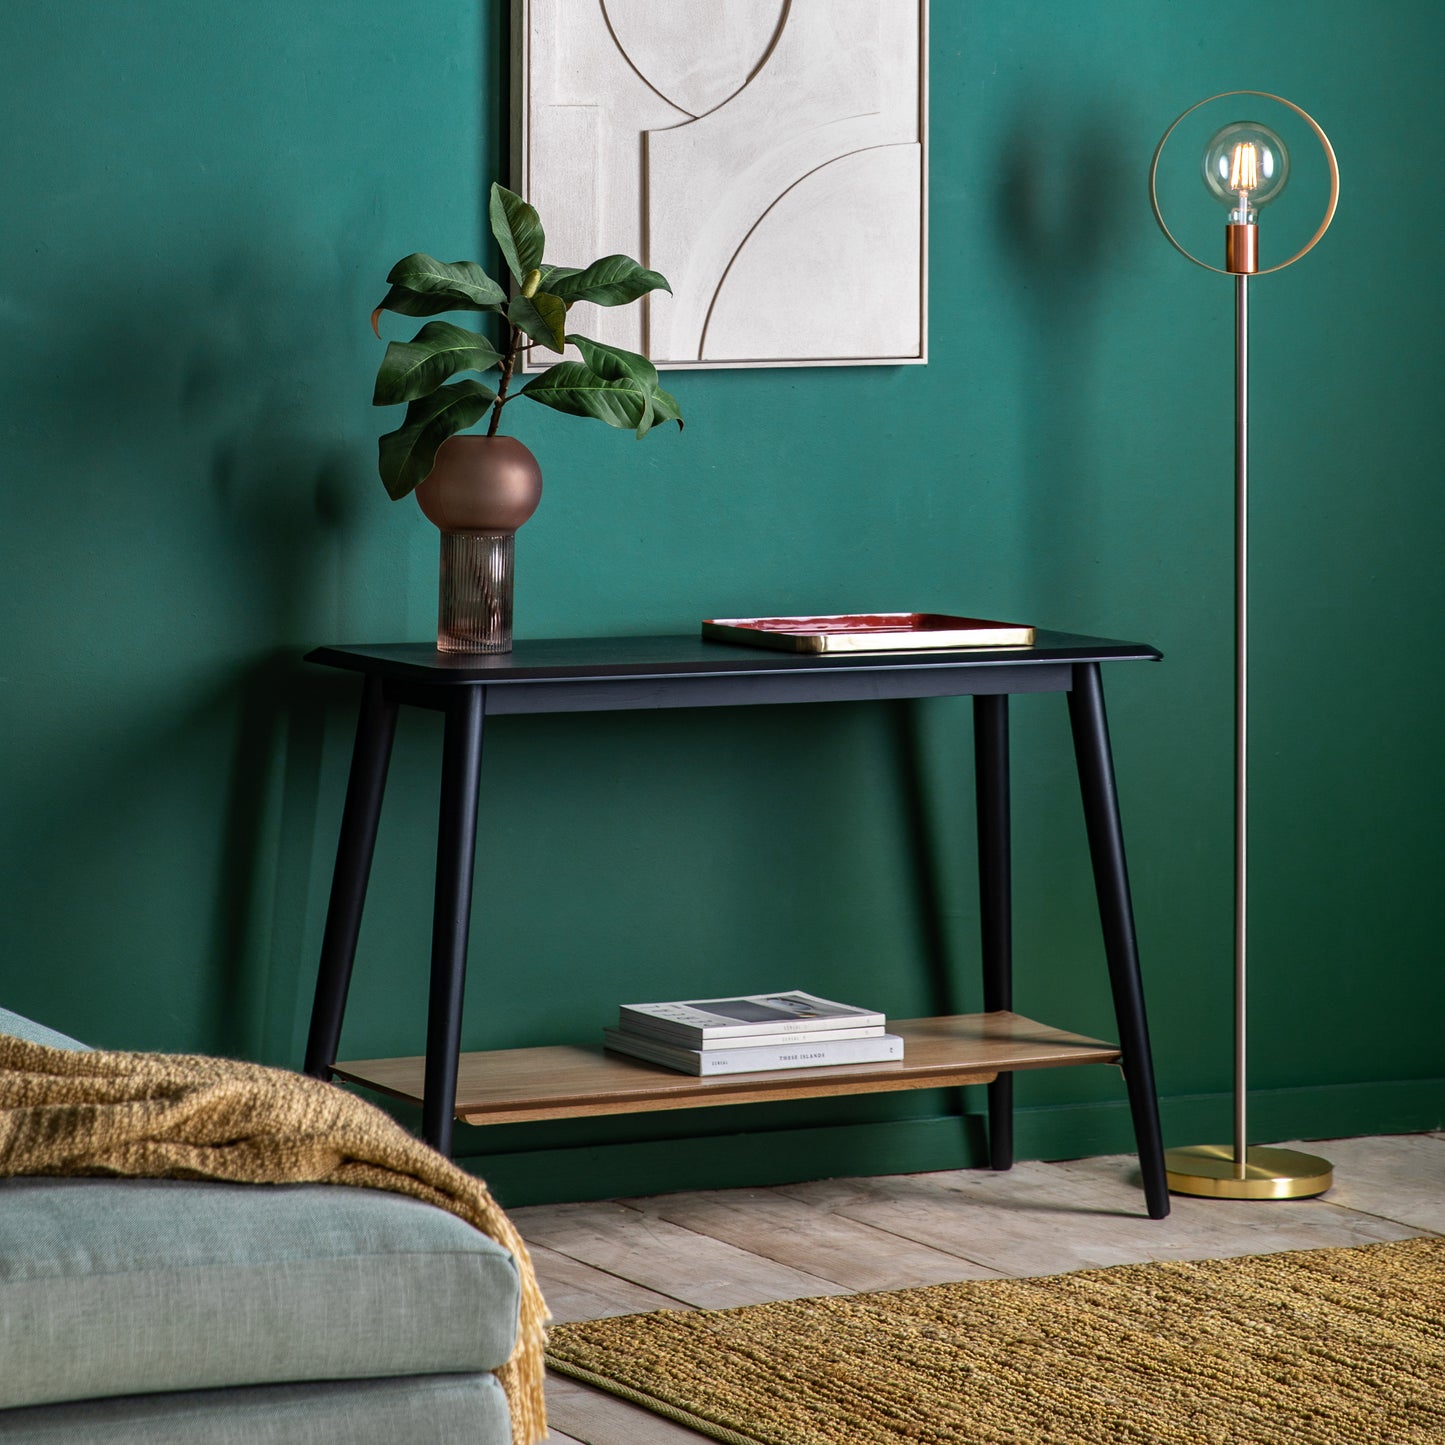 A living room with green walls and the Maddox Console Table with Shelf 110x750x40mm by Kikiathome.co.uk, enhancing interior decor through home furniture.